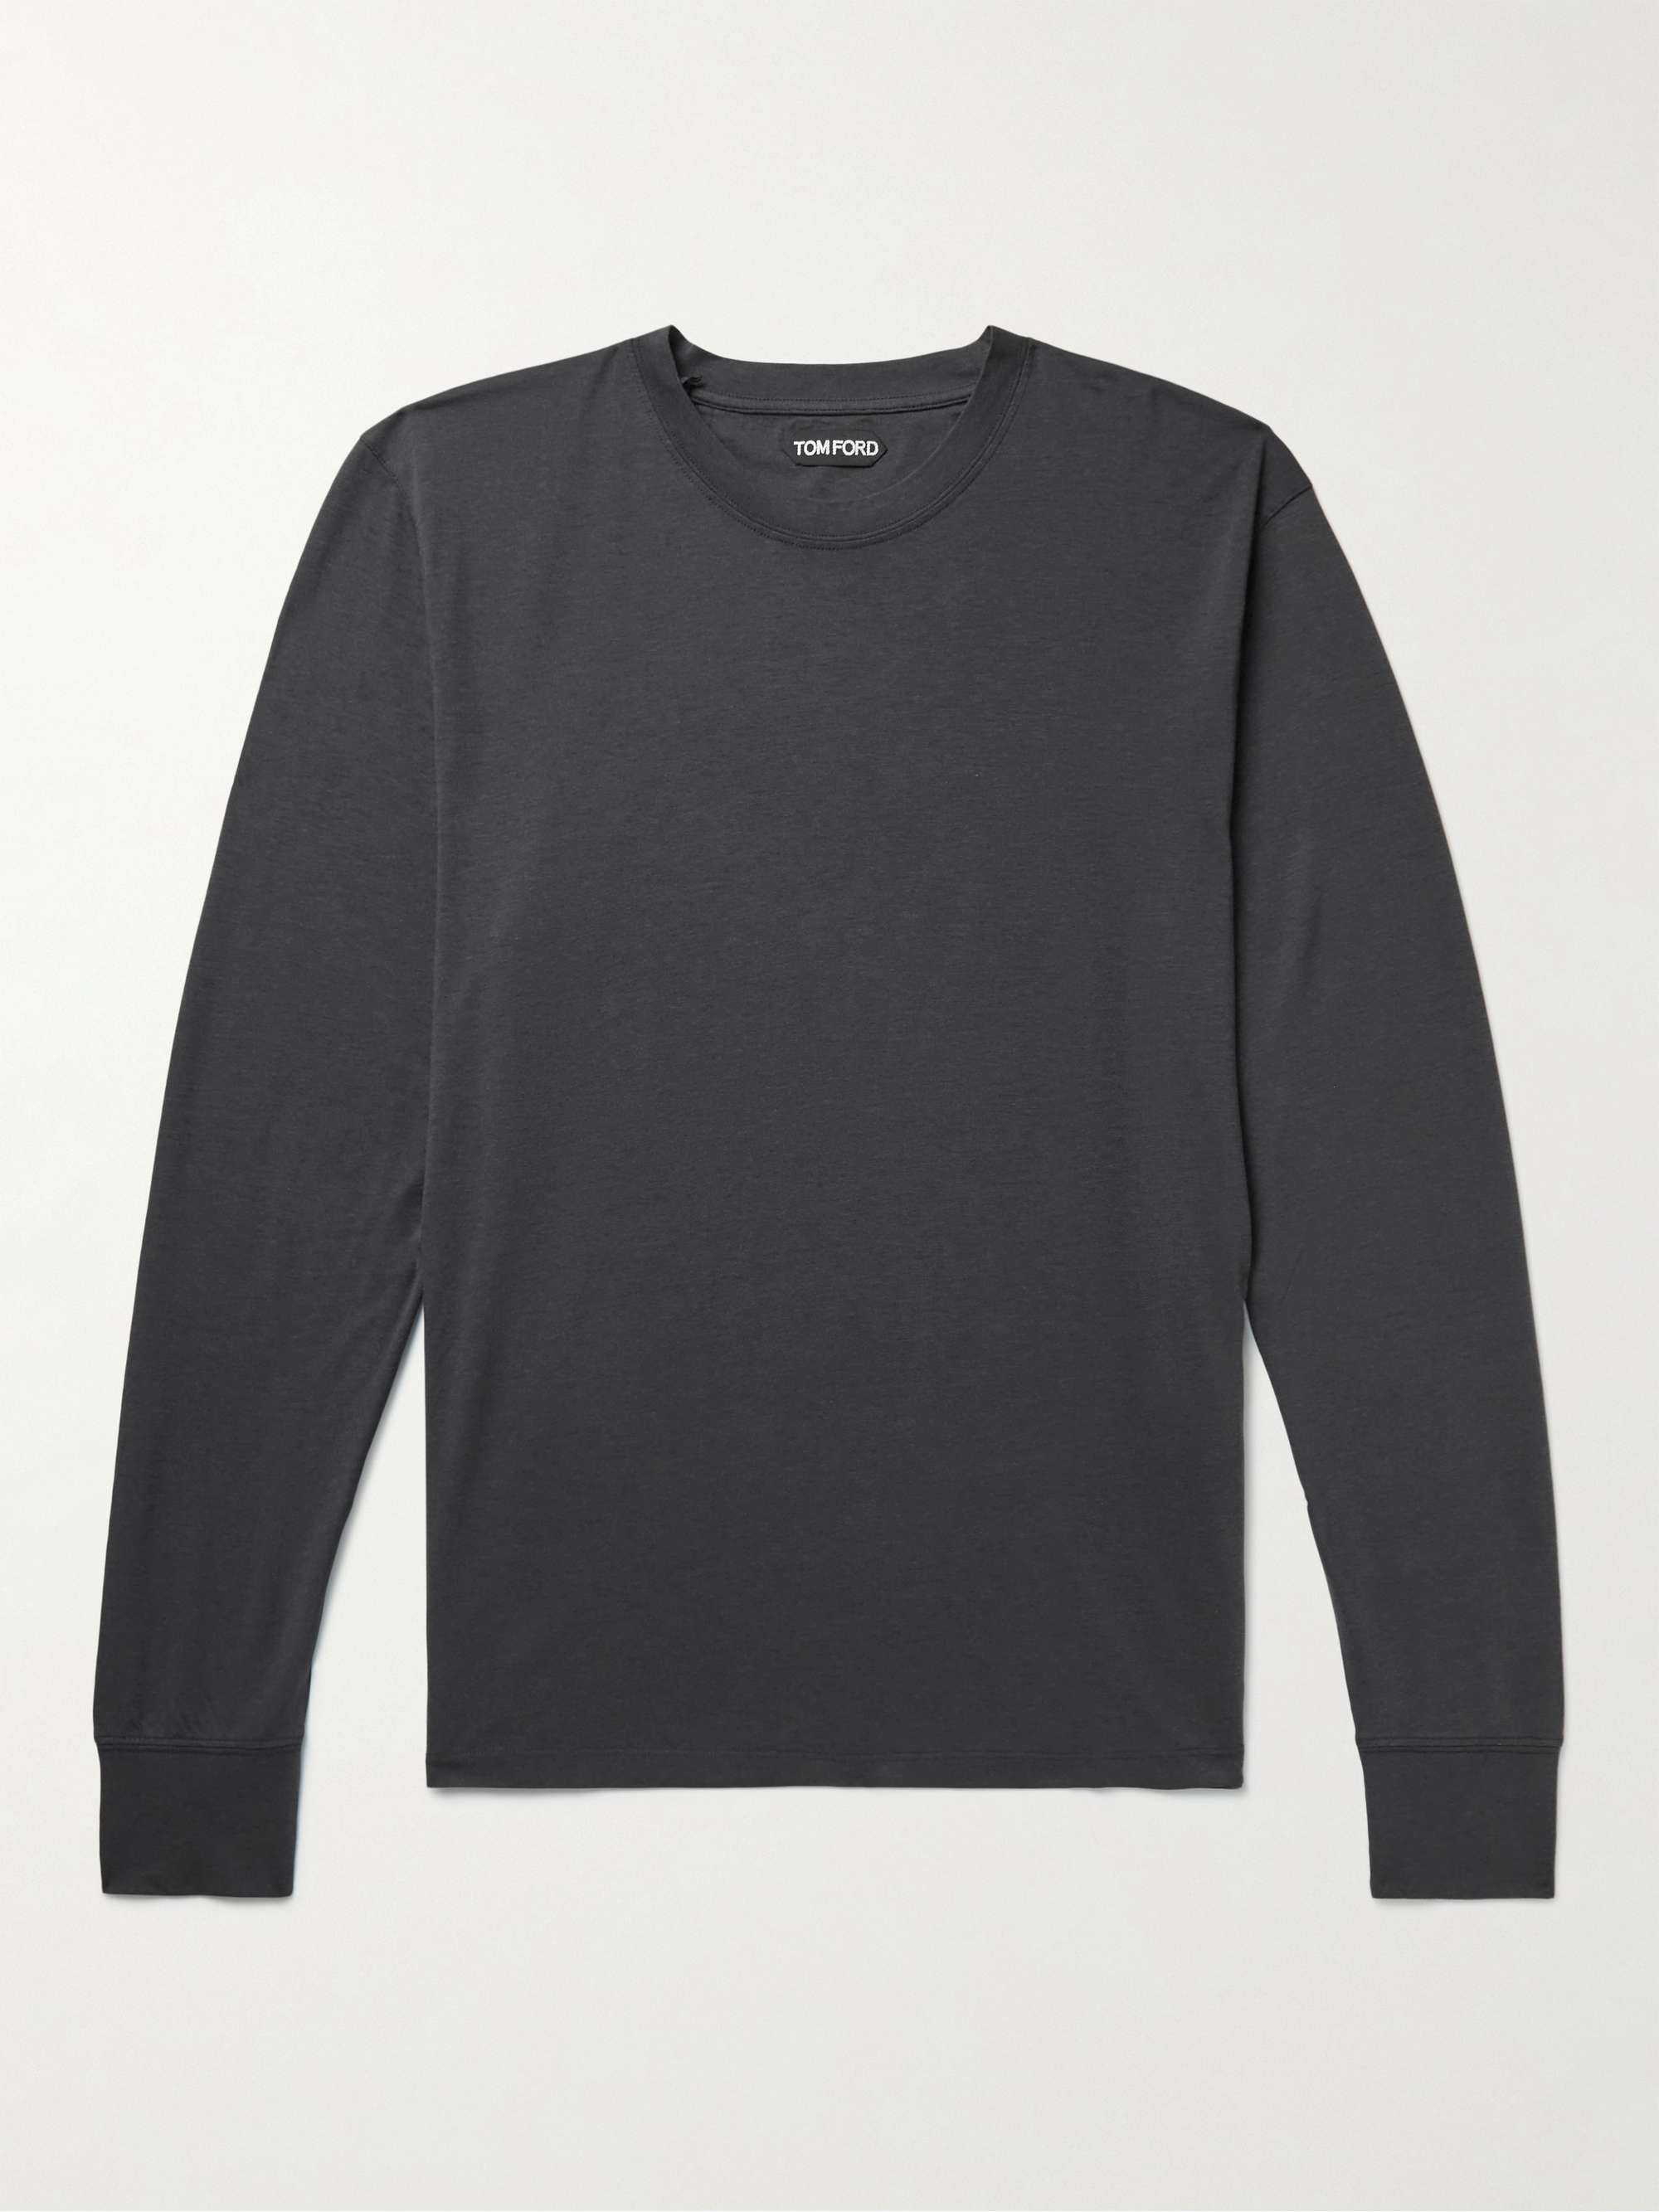 TOM FORD Lyocell and Cotton-Blend Jersey T-Shirt for Men | MR PORTER